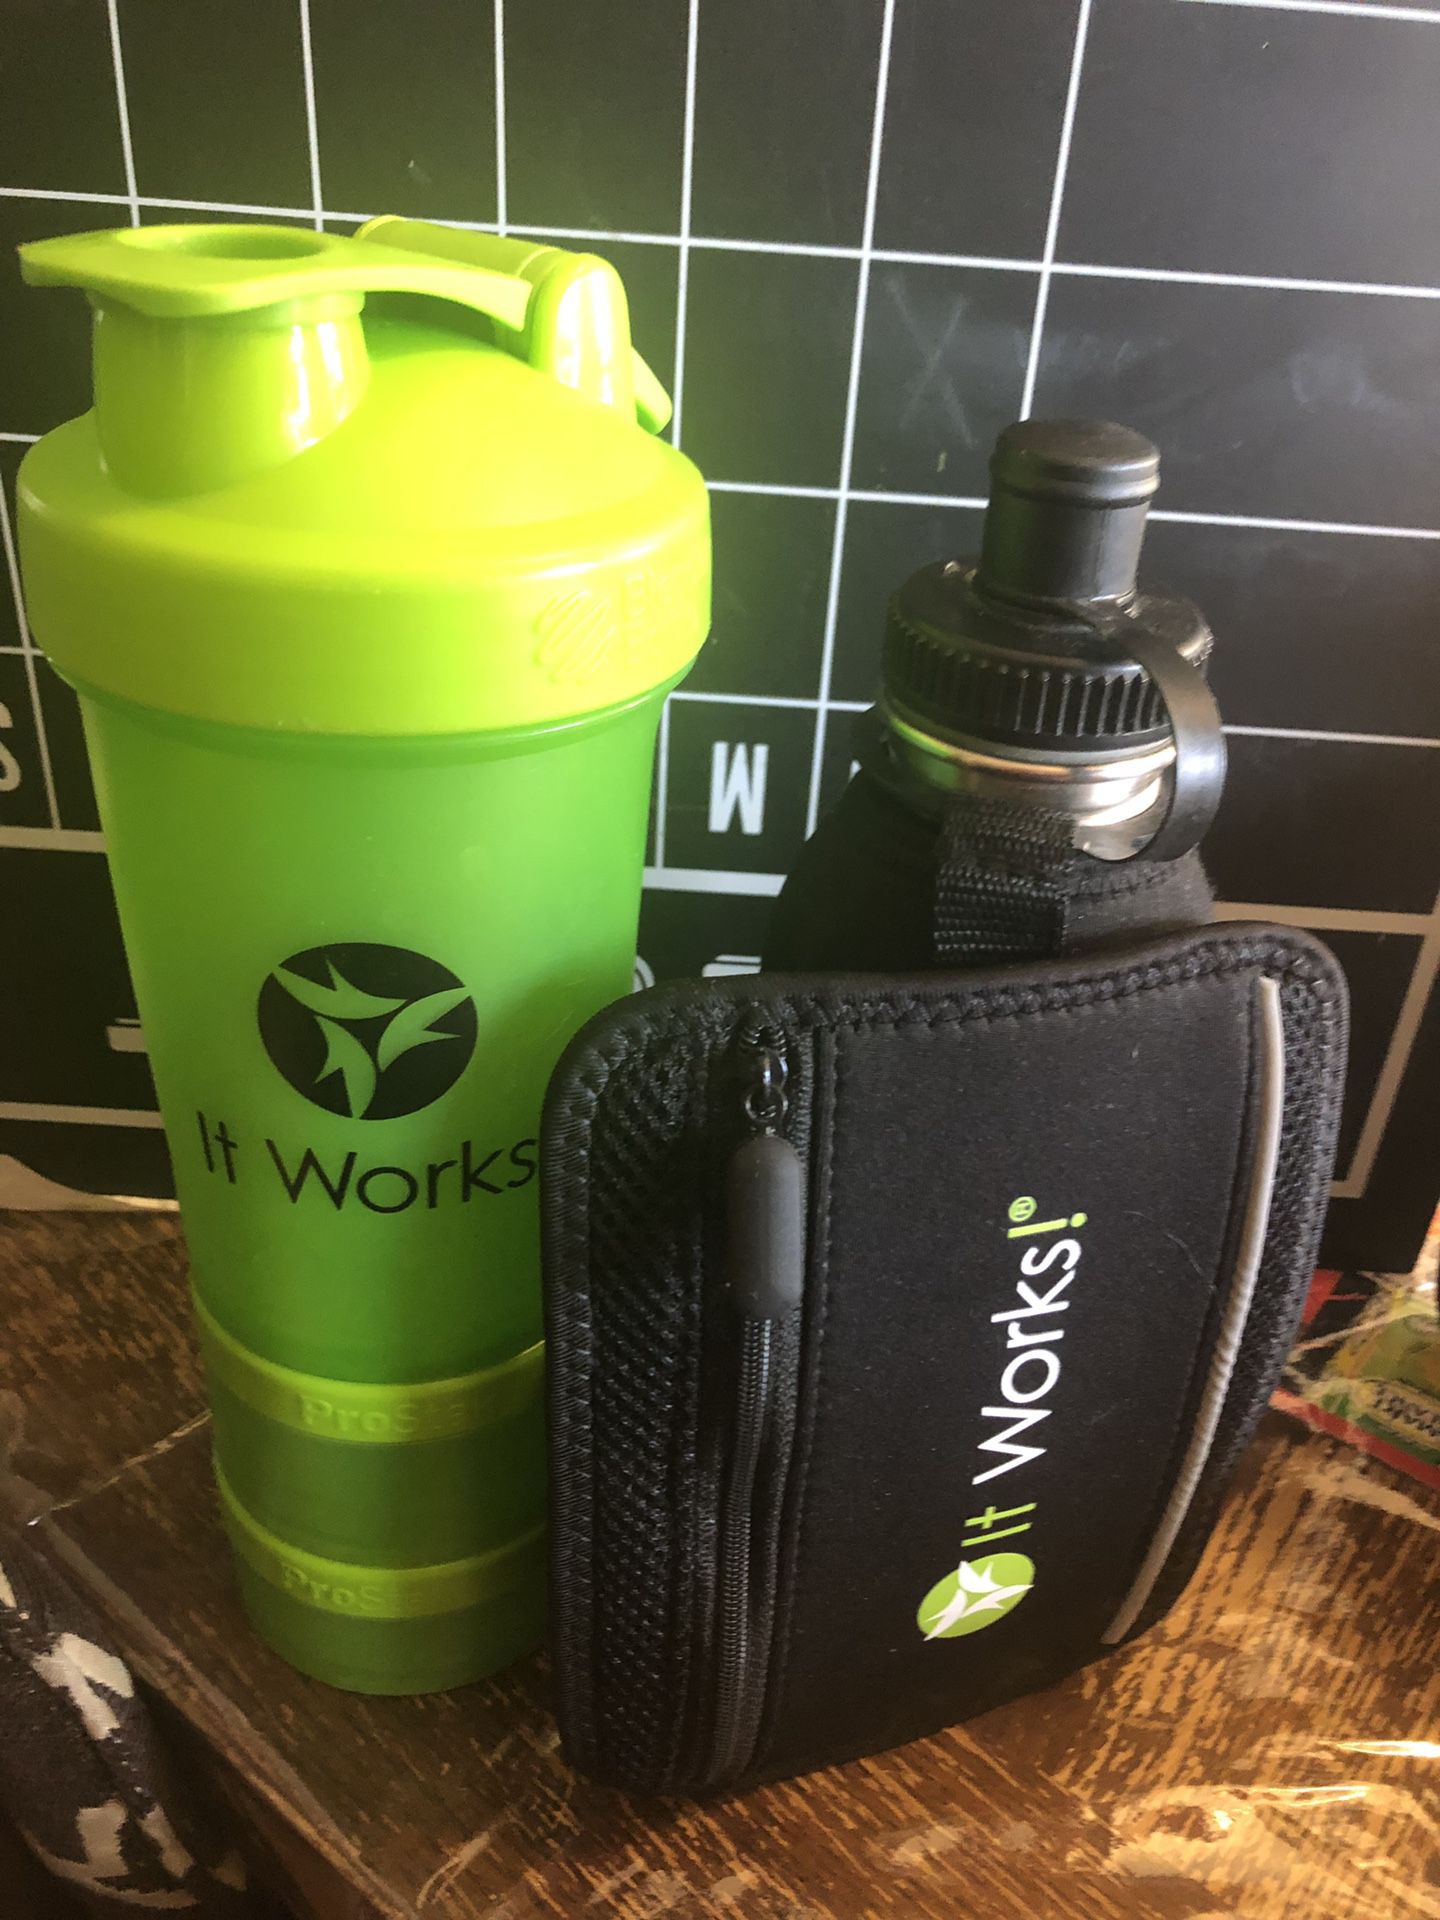 Itworks